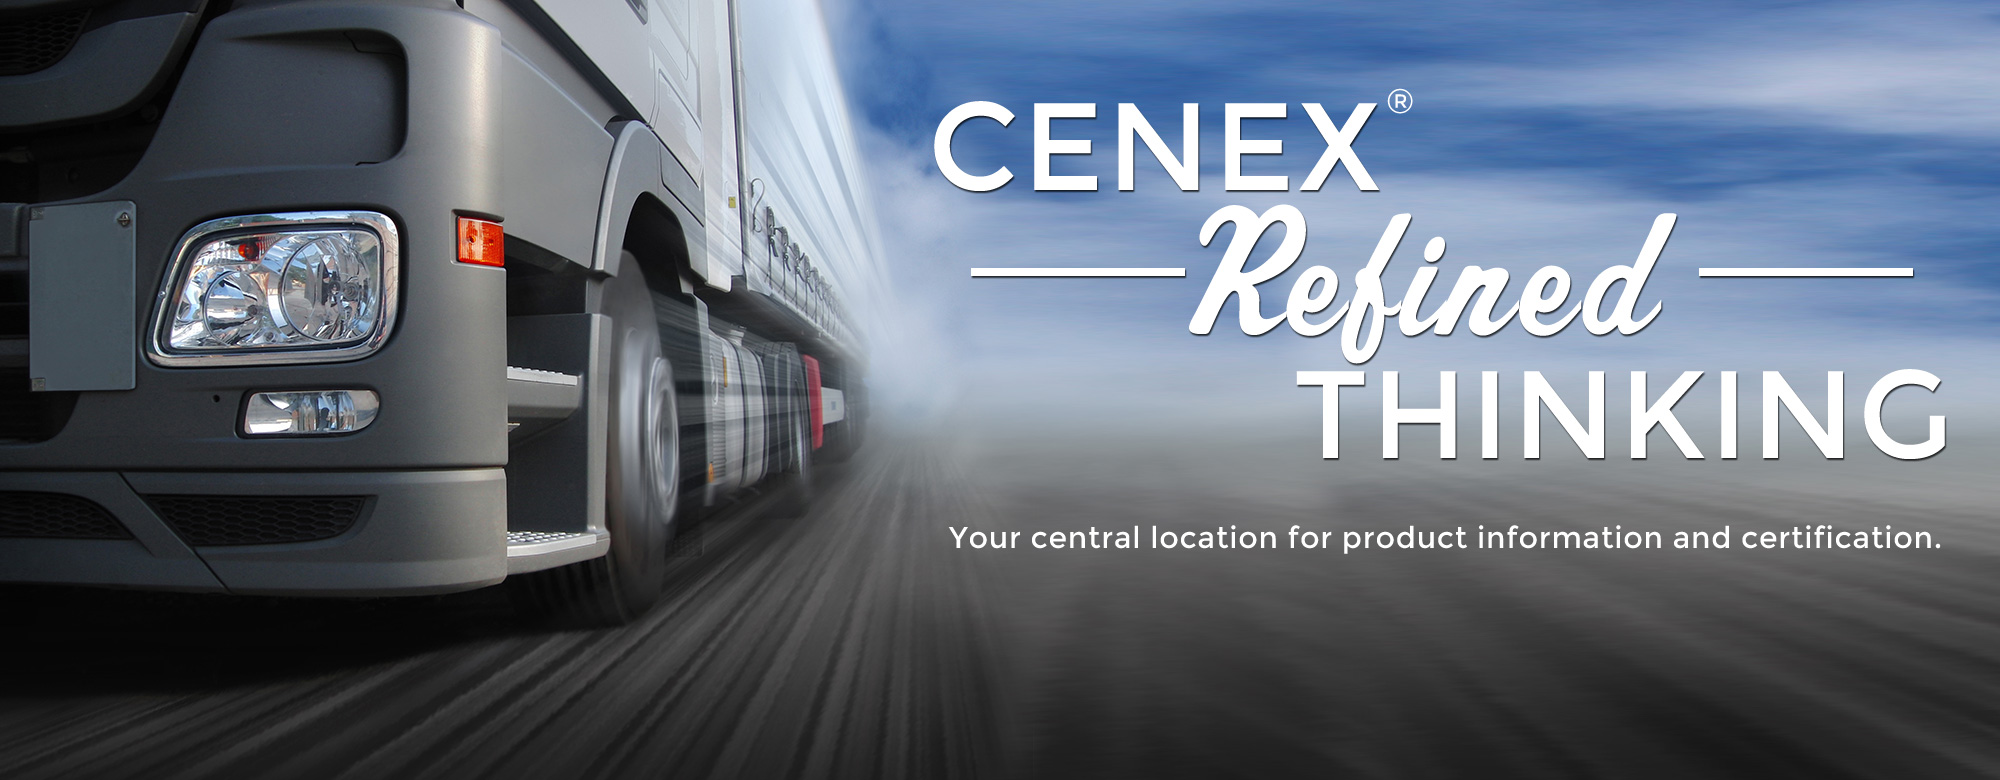 Cenex Refined Thinking - Your central location for product information and certification